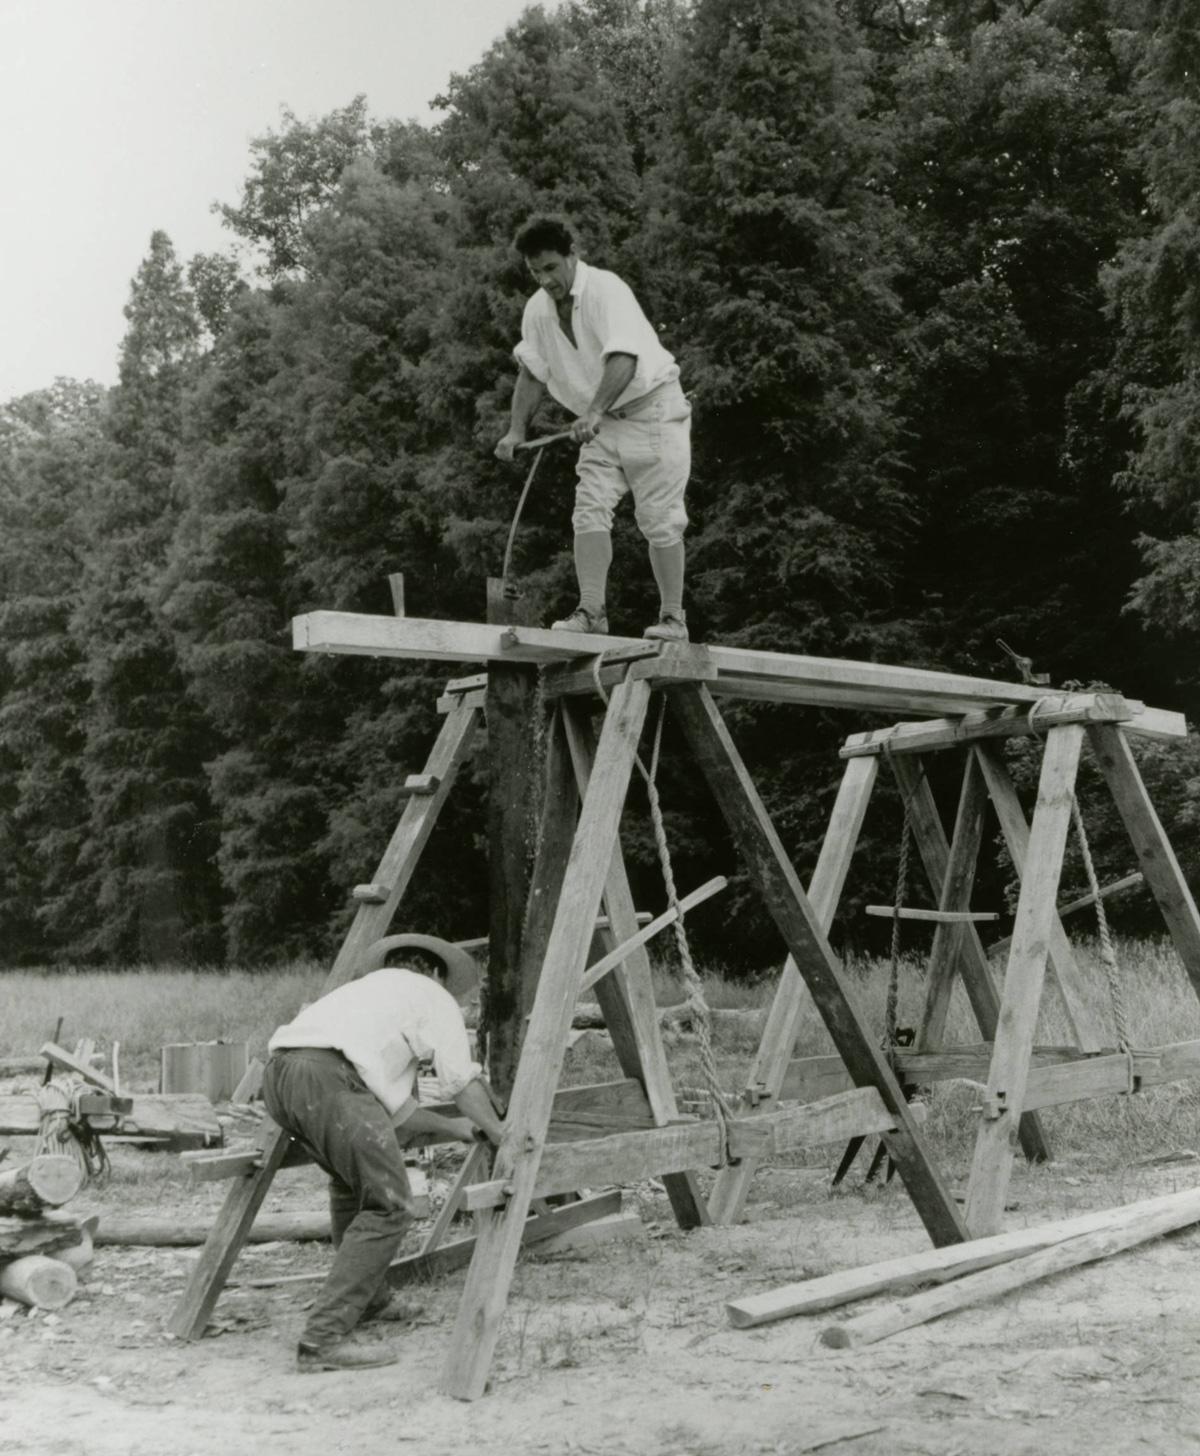 Pit sawing a framing member using colonial tools and techniques for reconstruction of the 16-sided treading barn in 1996.